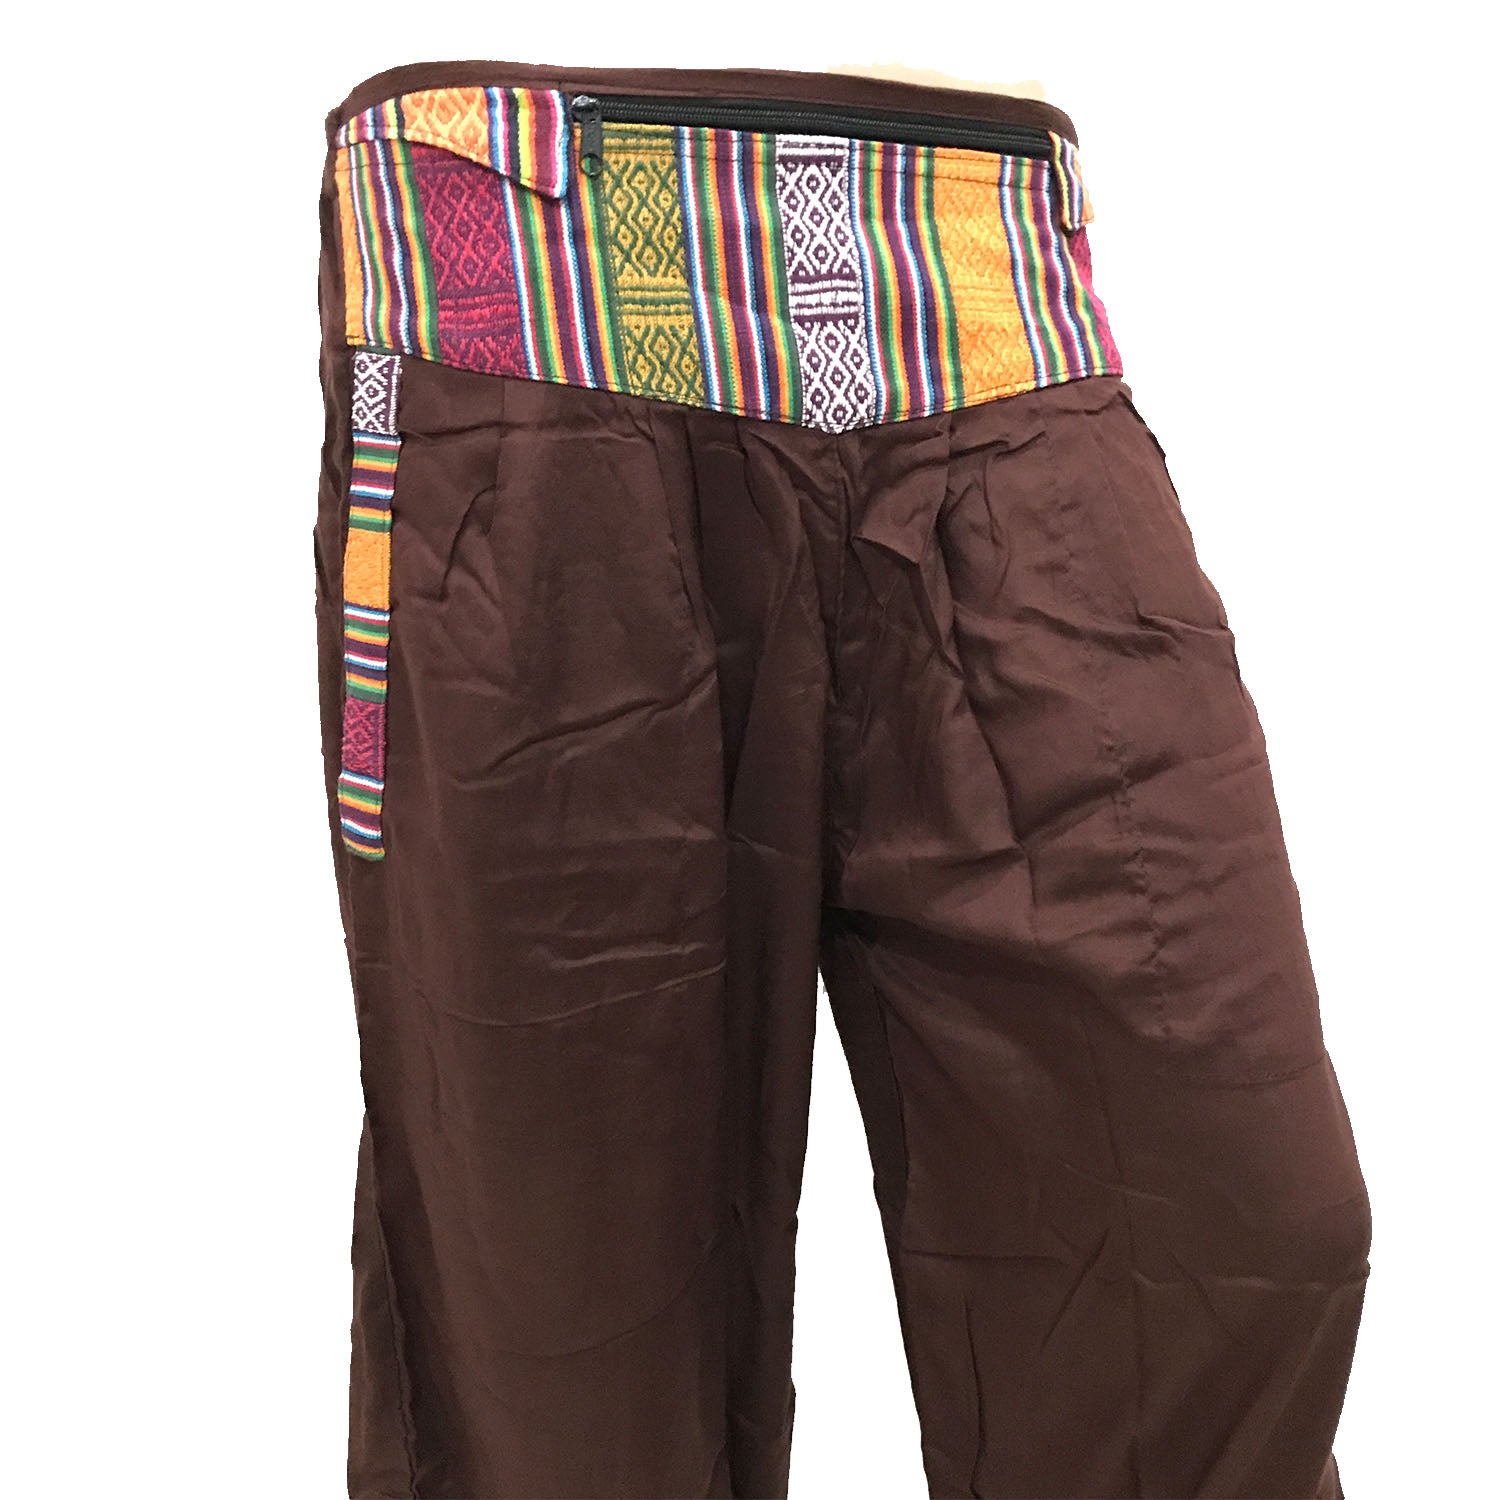 Ganesha Handicrafts, Cuffed Solid Colour Trousers, Colour Trousers, Trending Cuffed Colour Trousers, Brown Colour Trousers.